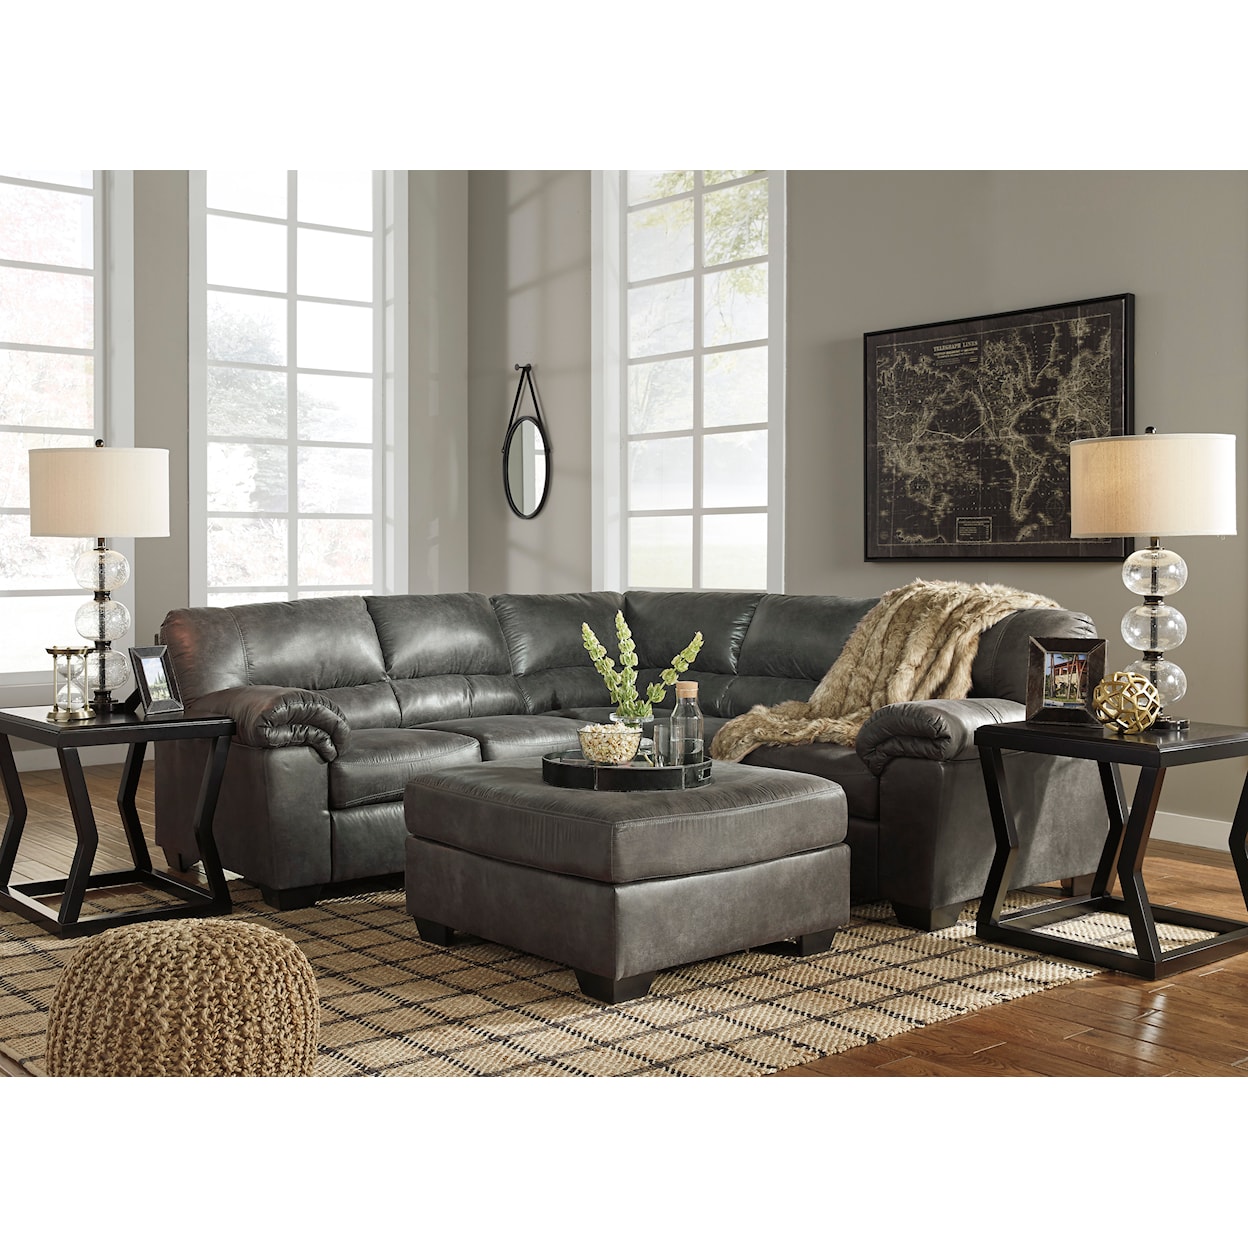 Signature Design by Ashley Bladen 2-Piece Sectional with Ottoman